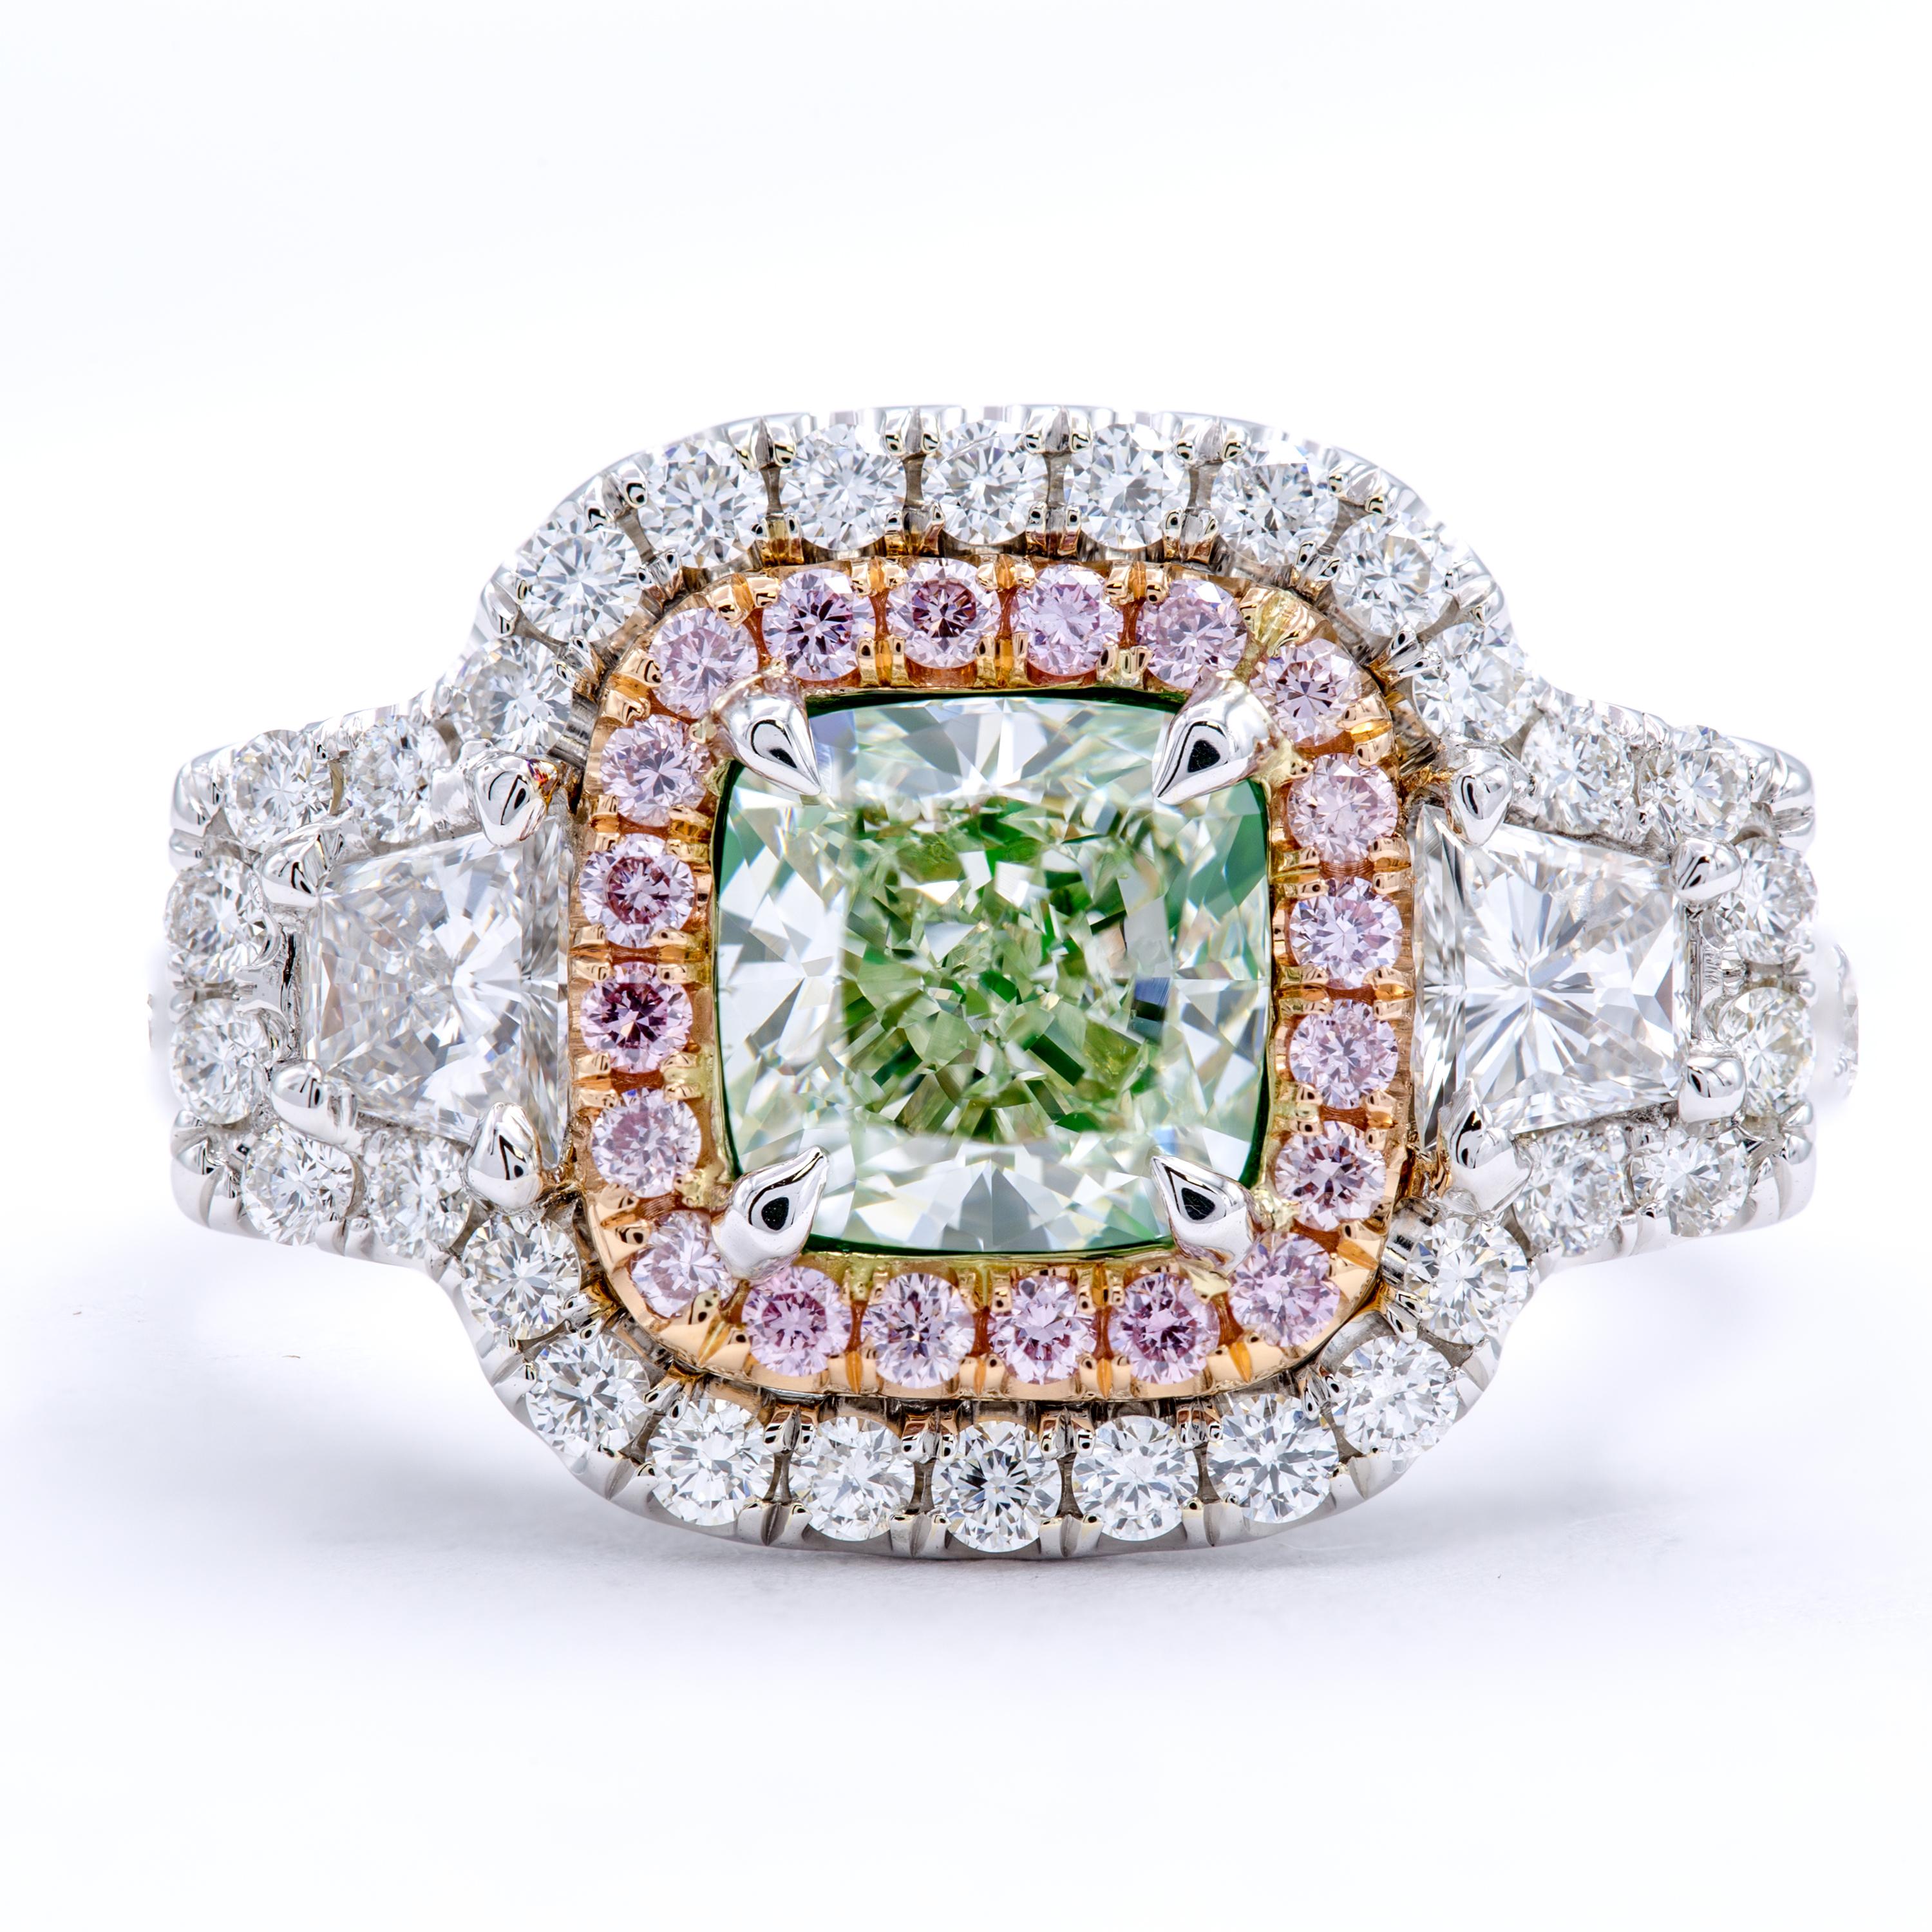 A GIA certified natural fancy light green diamond boasting an exceptionally rare color within a beautiful cushion cut shape. Two trapezoid side stones accent wonderfully on a band of 18Kt white and rose gold set with a double halo of natural fancy